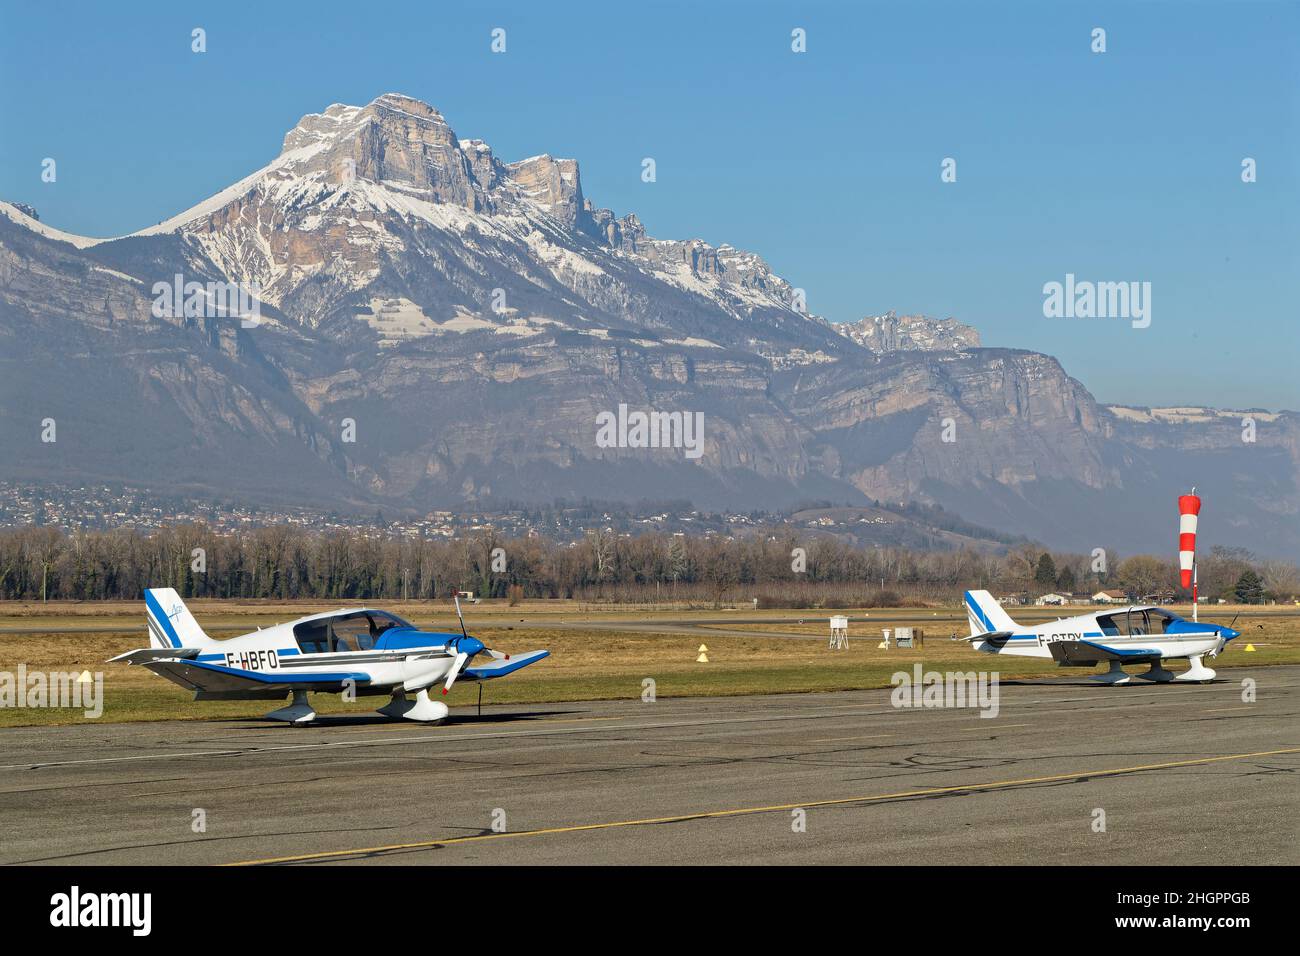 LE VERSOUD, FRANCE, january 14, 2022 : Small planes in Aerodrome de Grenoble-Le Versoud with Chartreuse mountain range in the background Stock Photo